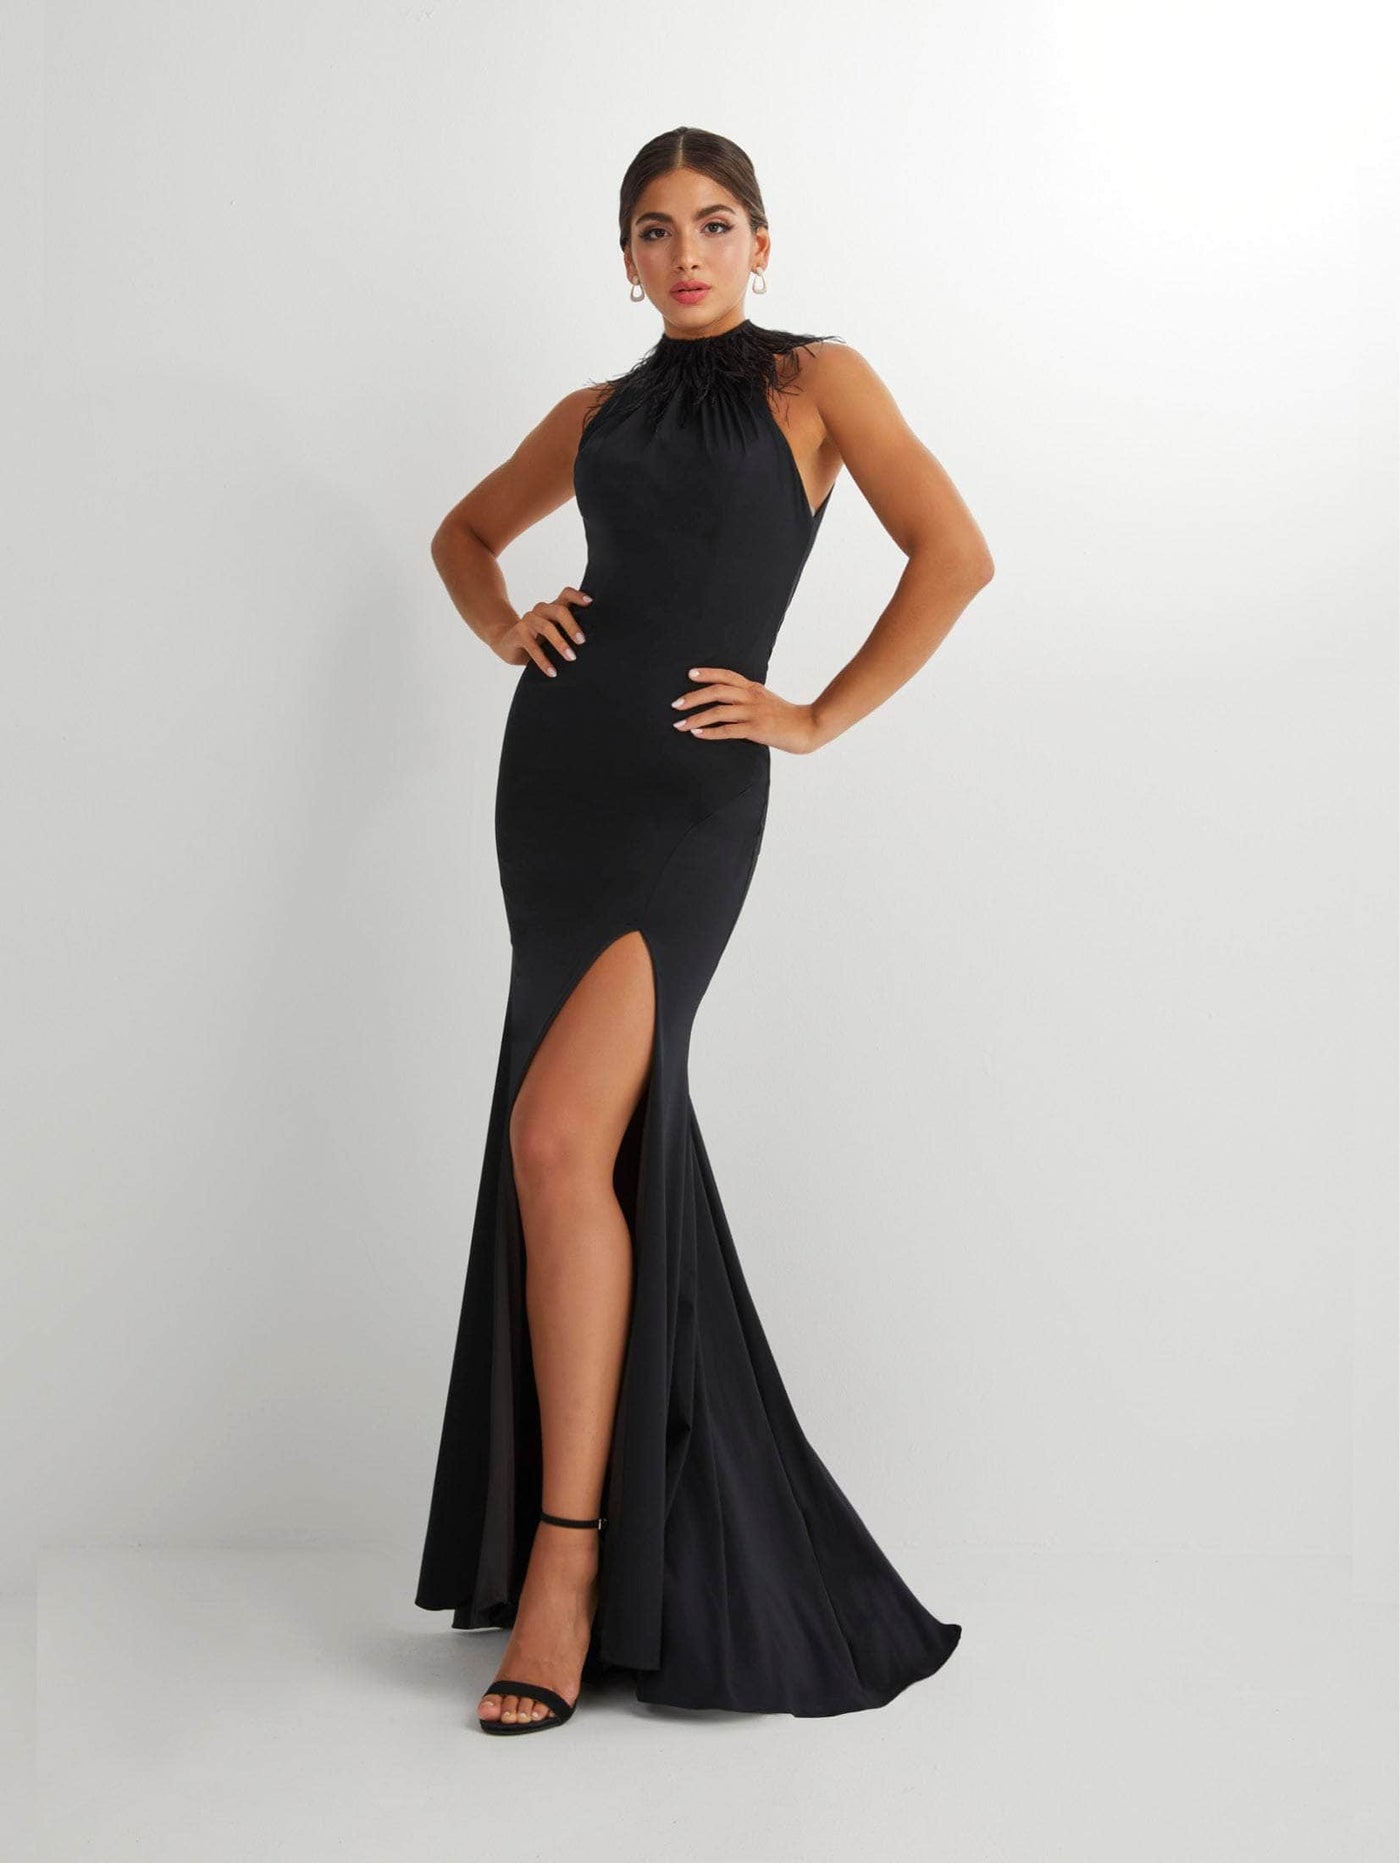 Studio 17 Prom 12913 - Feathered Halter Neck Evening Gown Special Occasion Dress